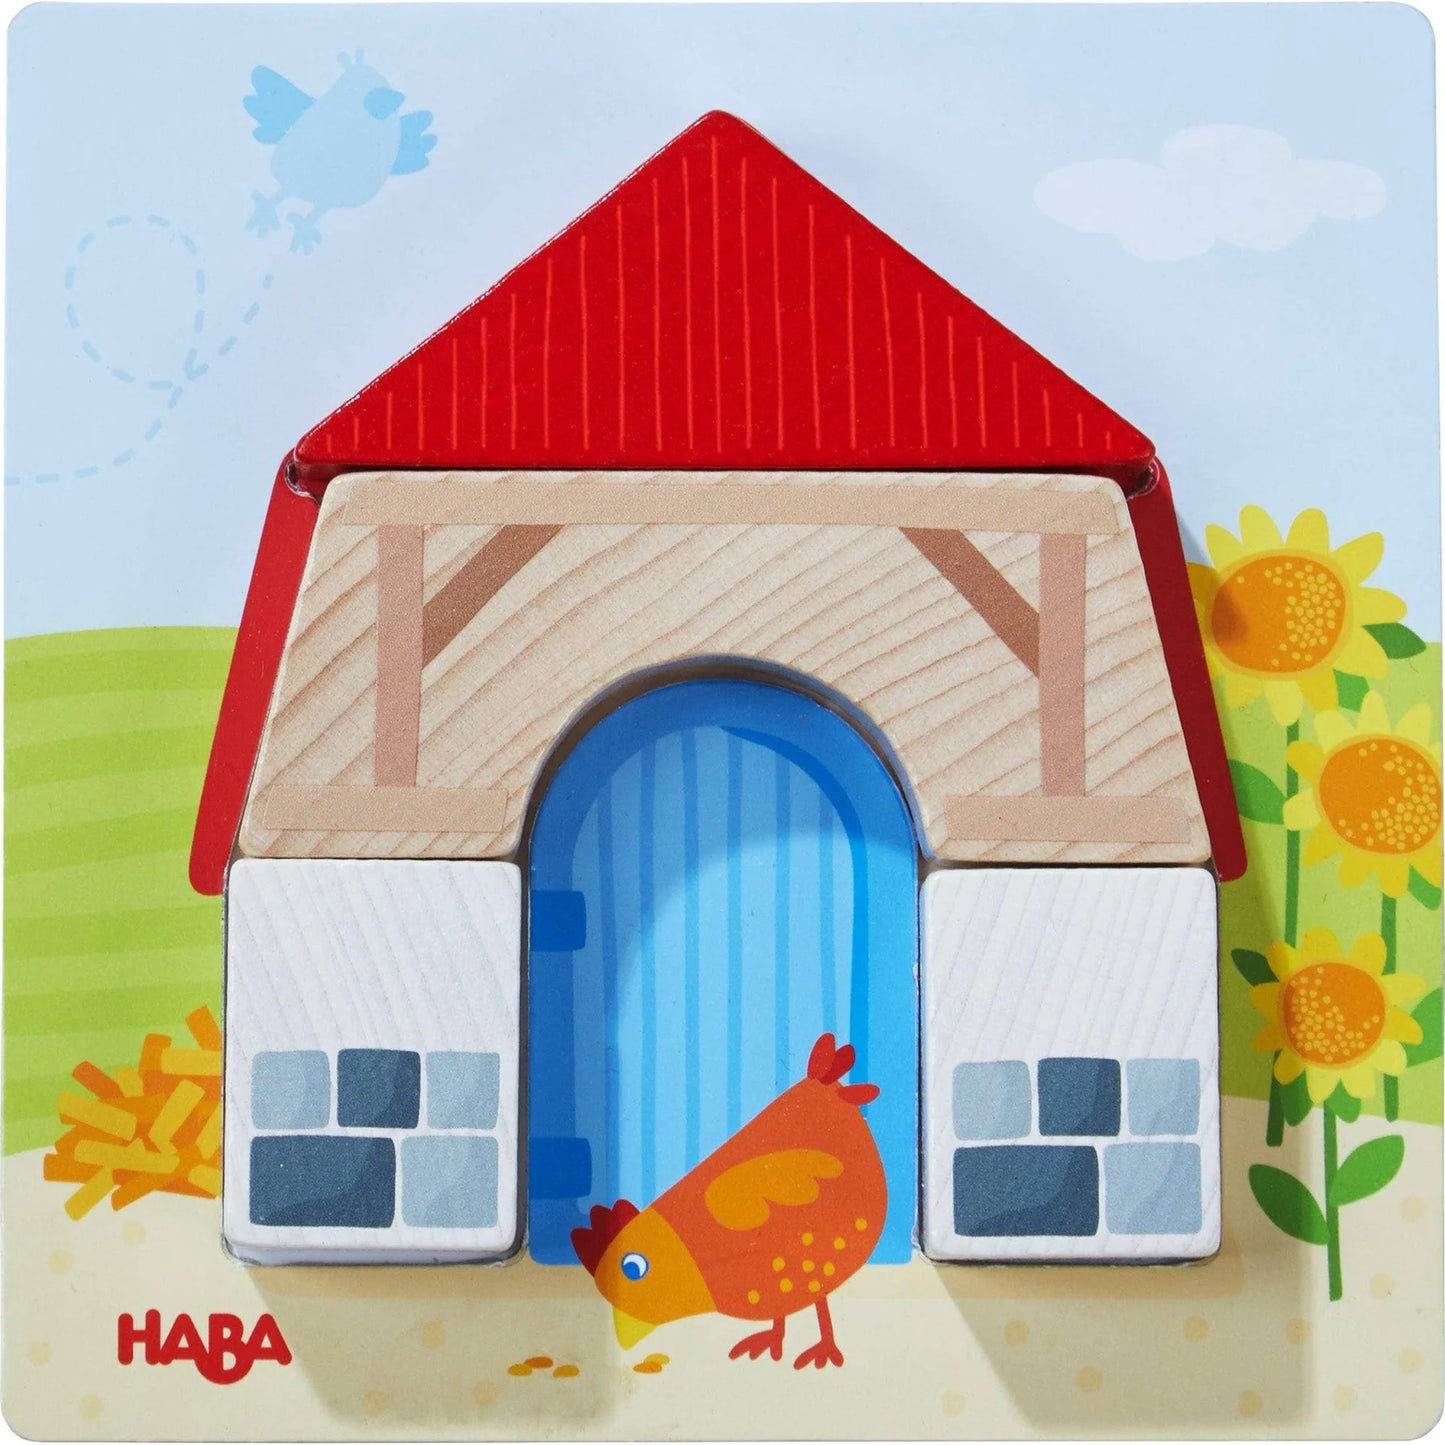 HABA On the Farm Arranging Game